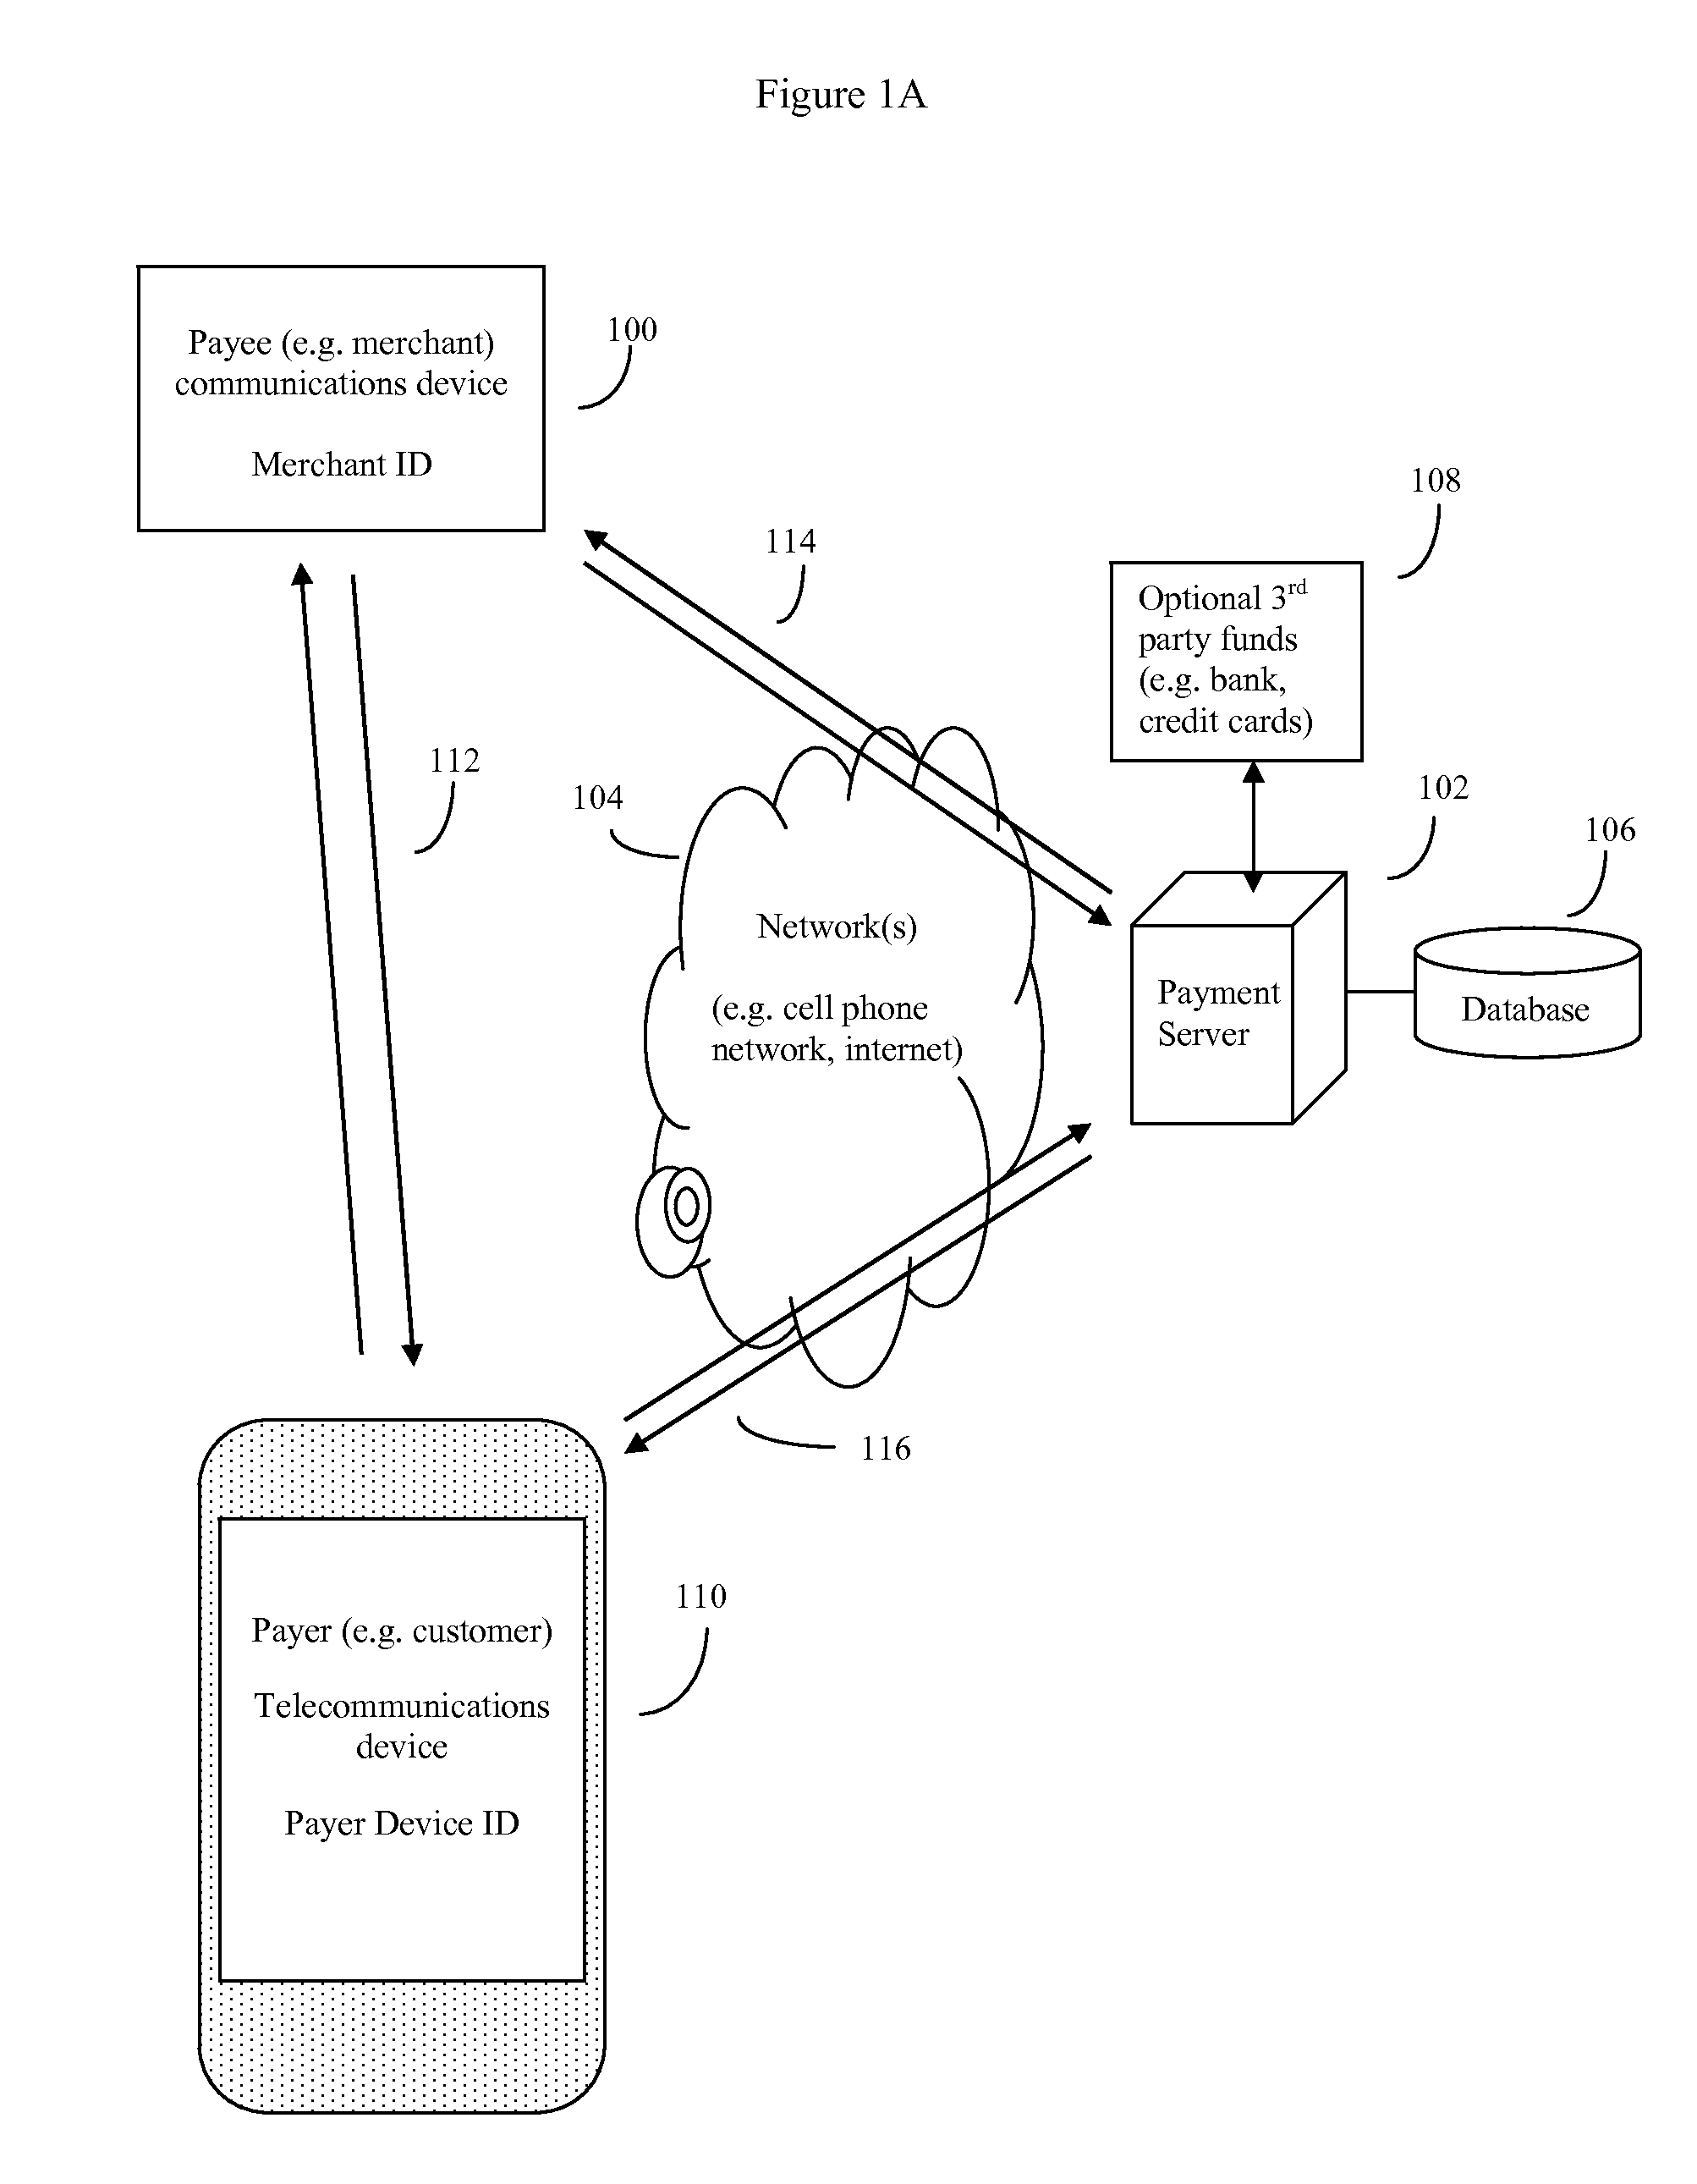 System and method of electronic payment using payee provided transaction identification codes